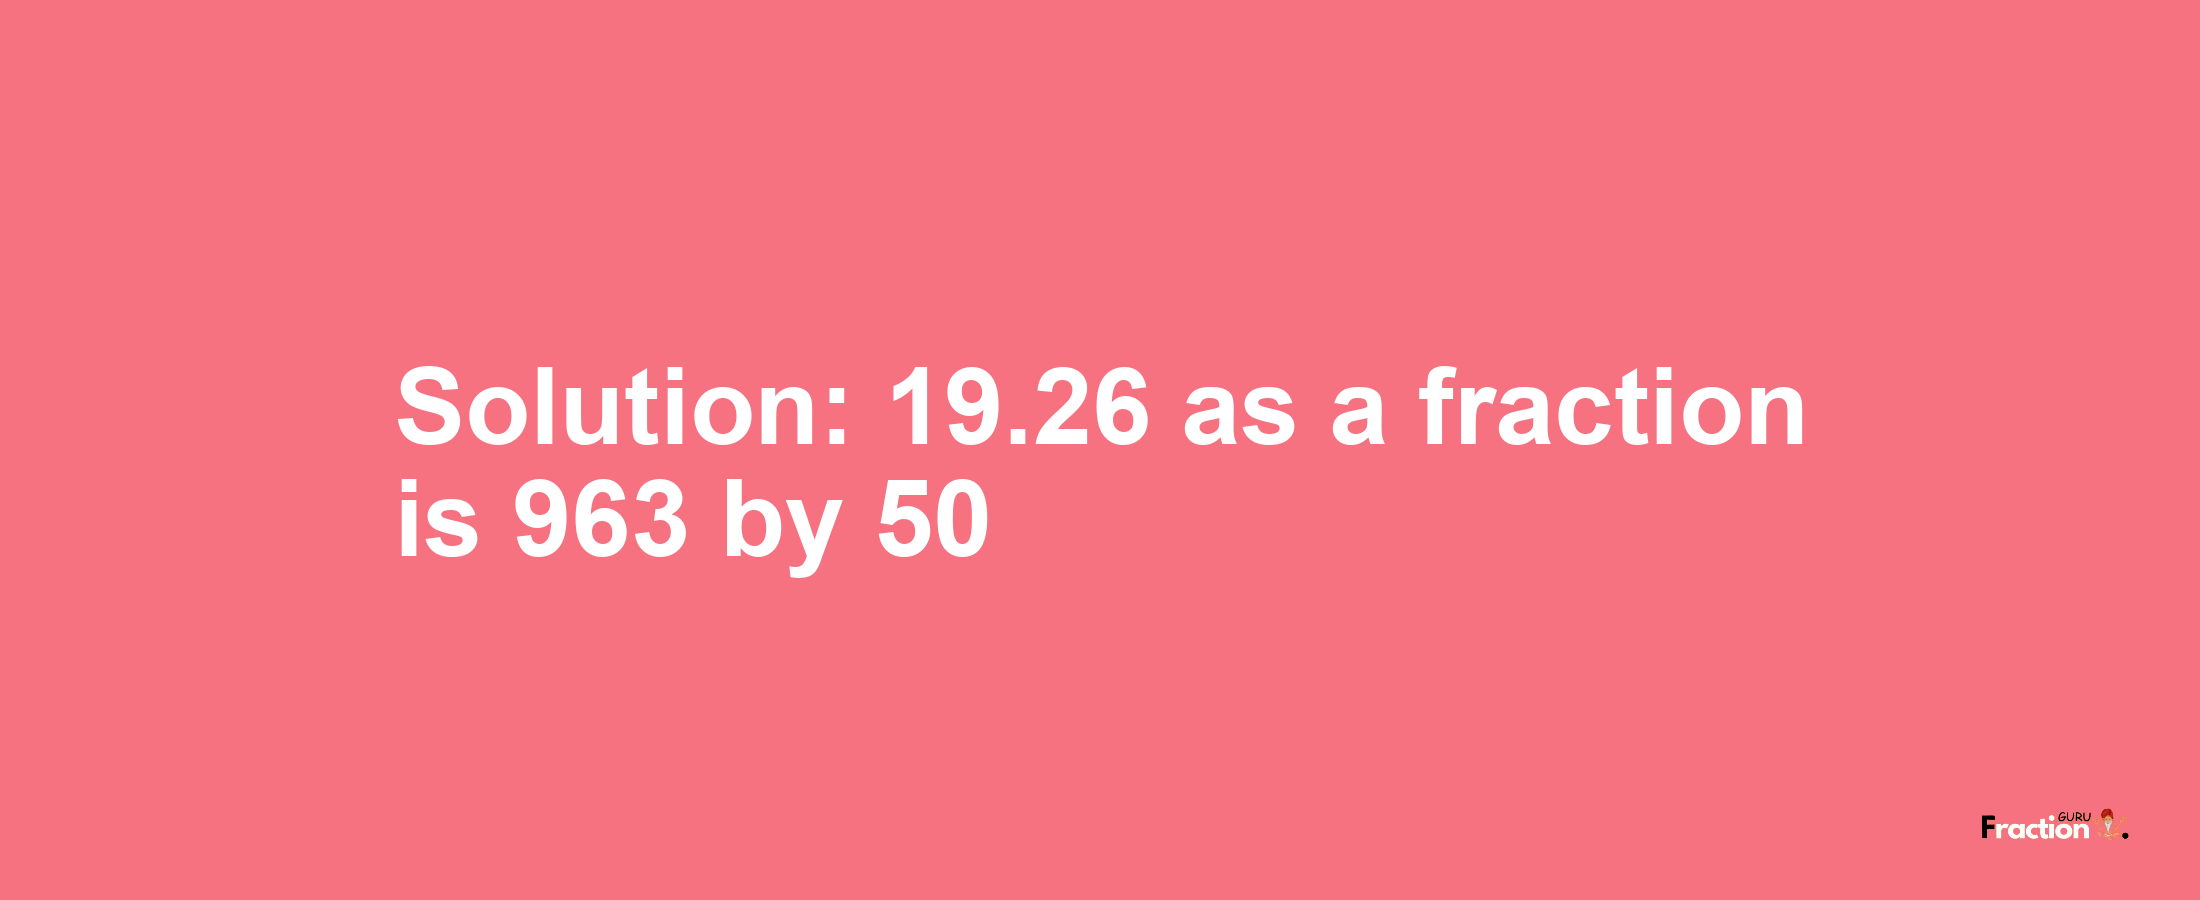 Solution:19.26 as a fraction is 963/50